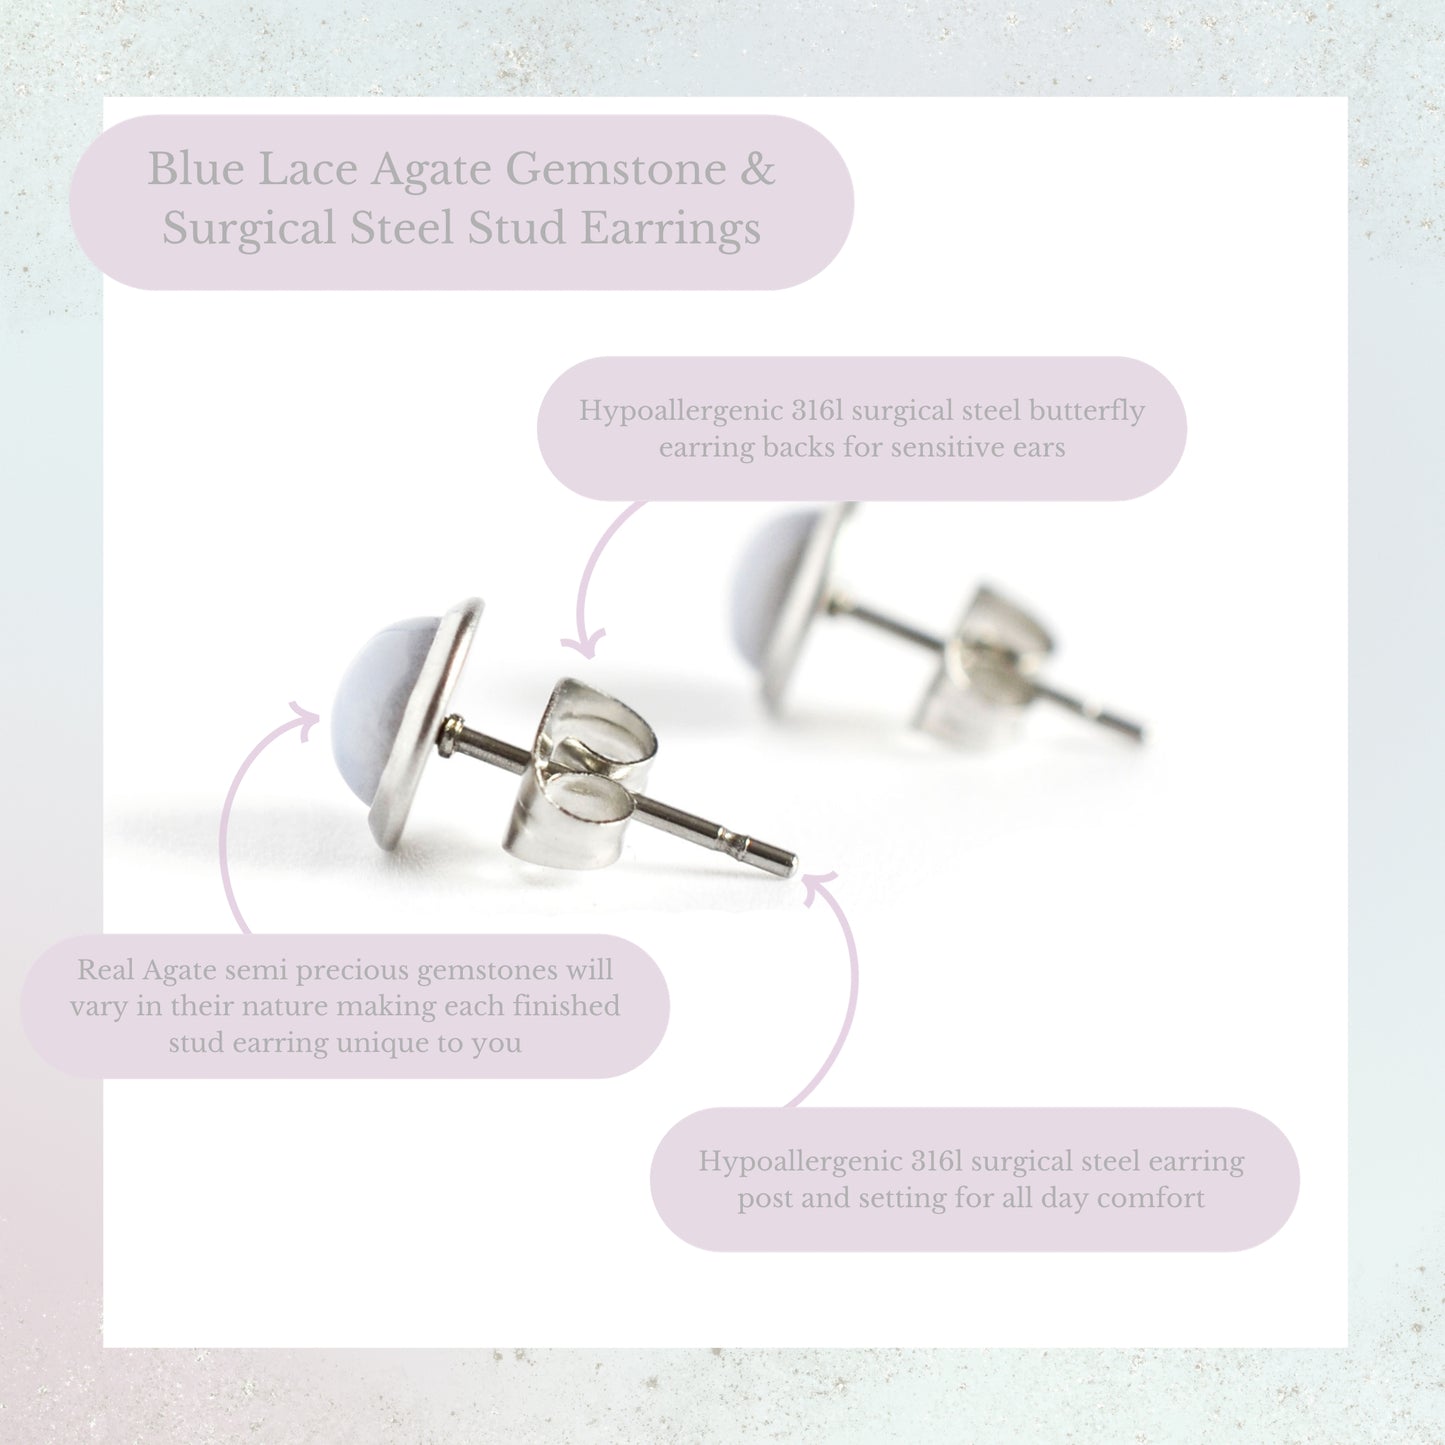 Blue Lace Agate Gemstone & Surgical Steel Stud Earrings Product Information Graphic